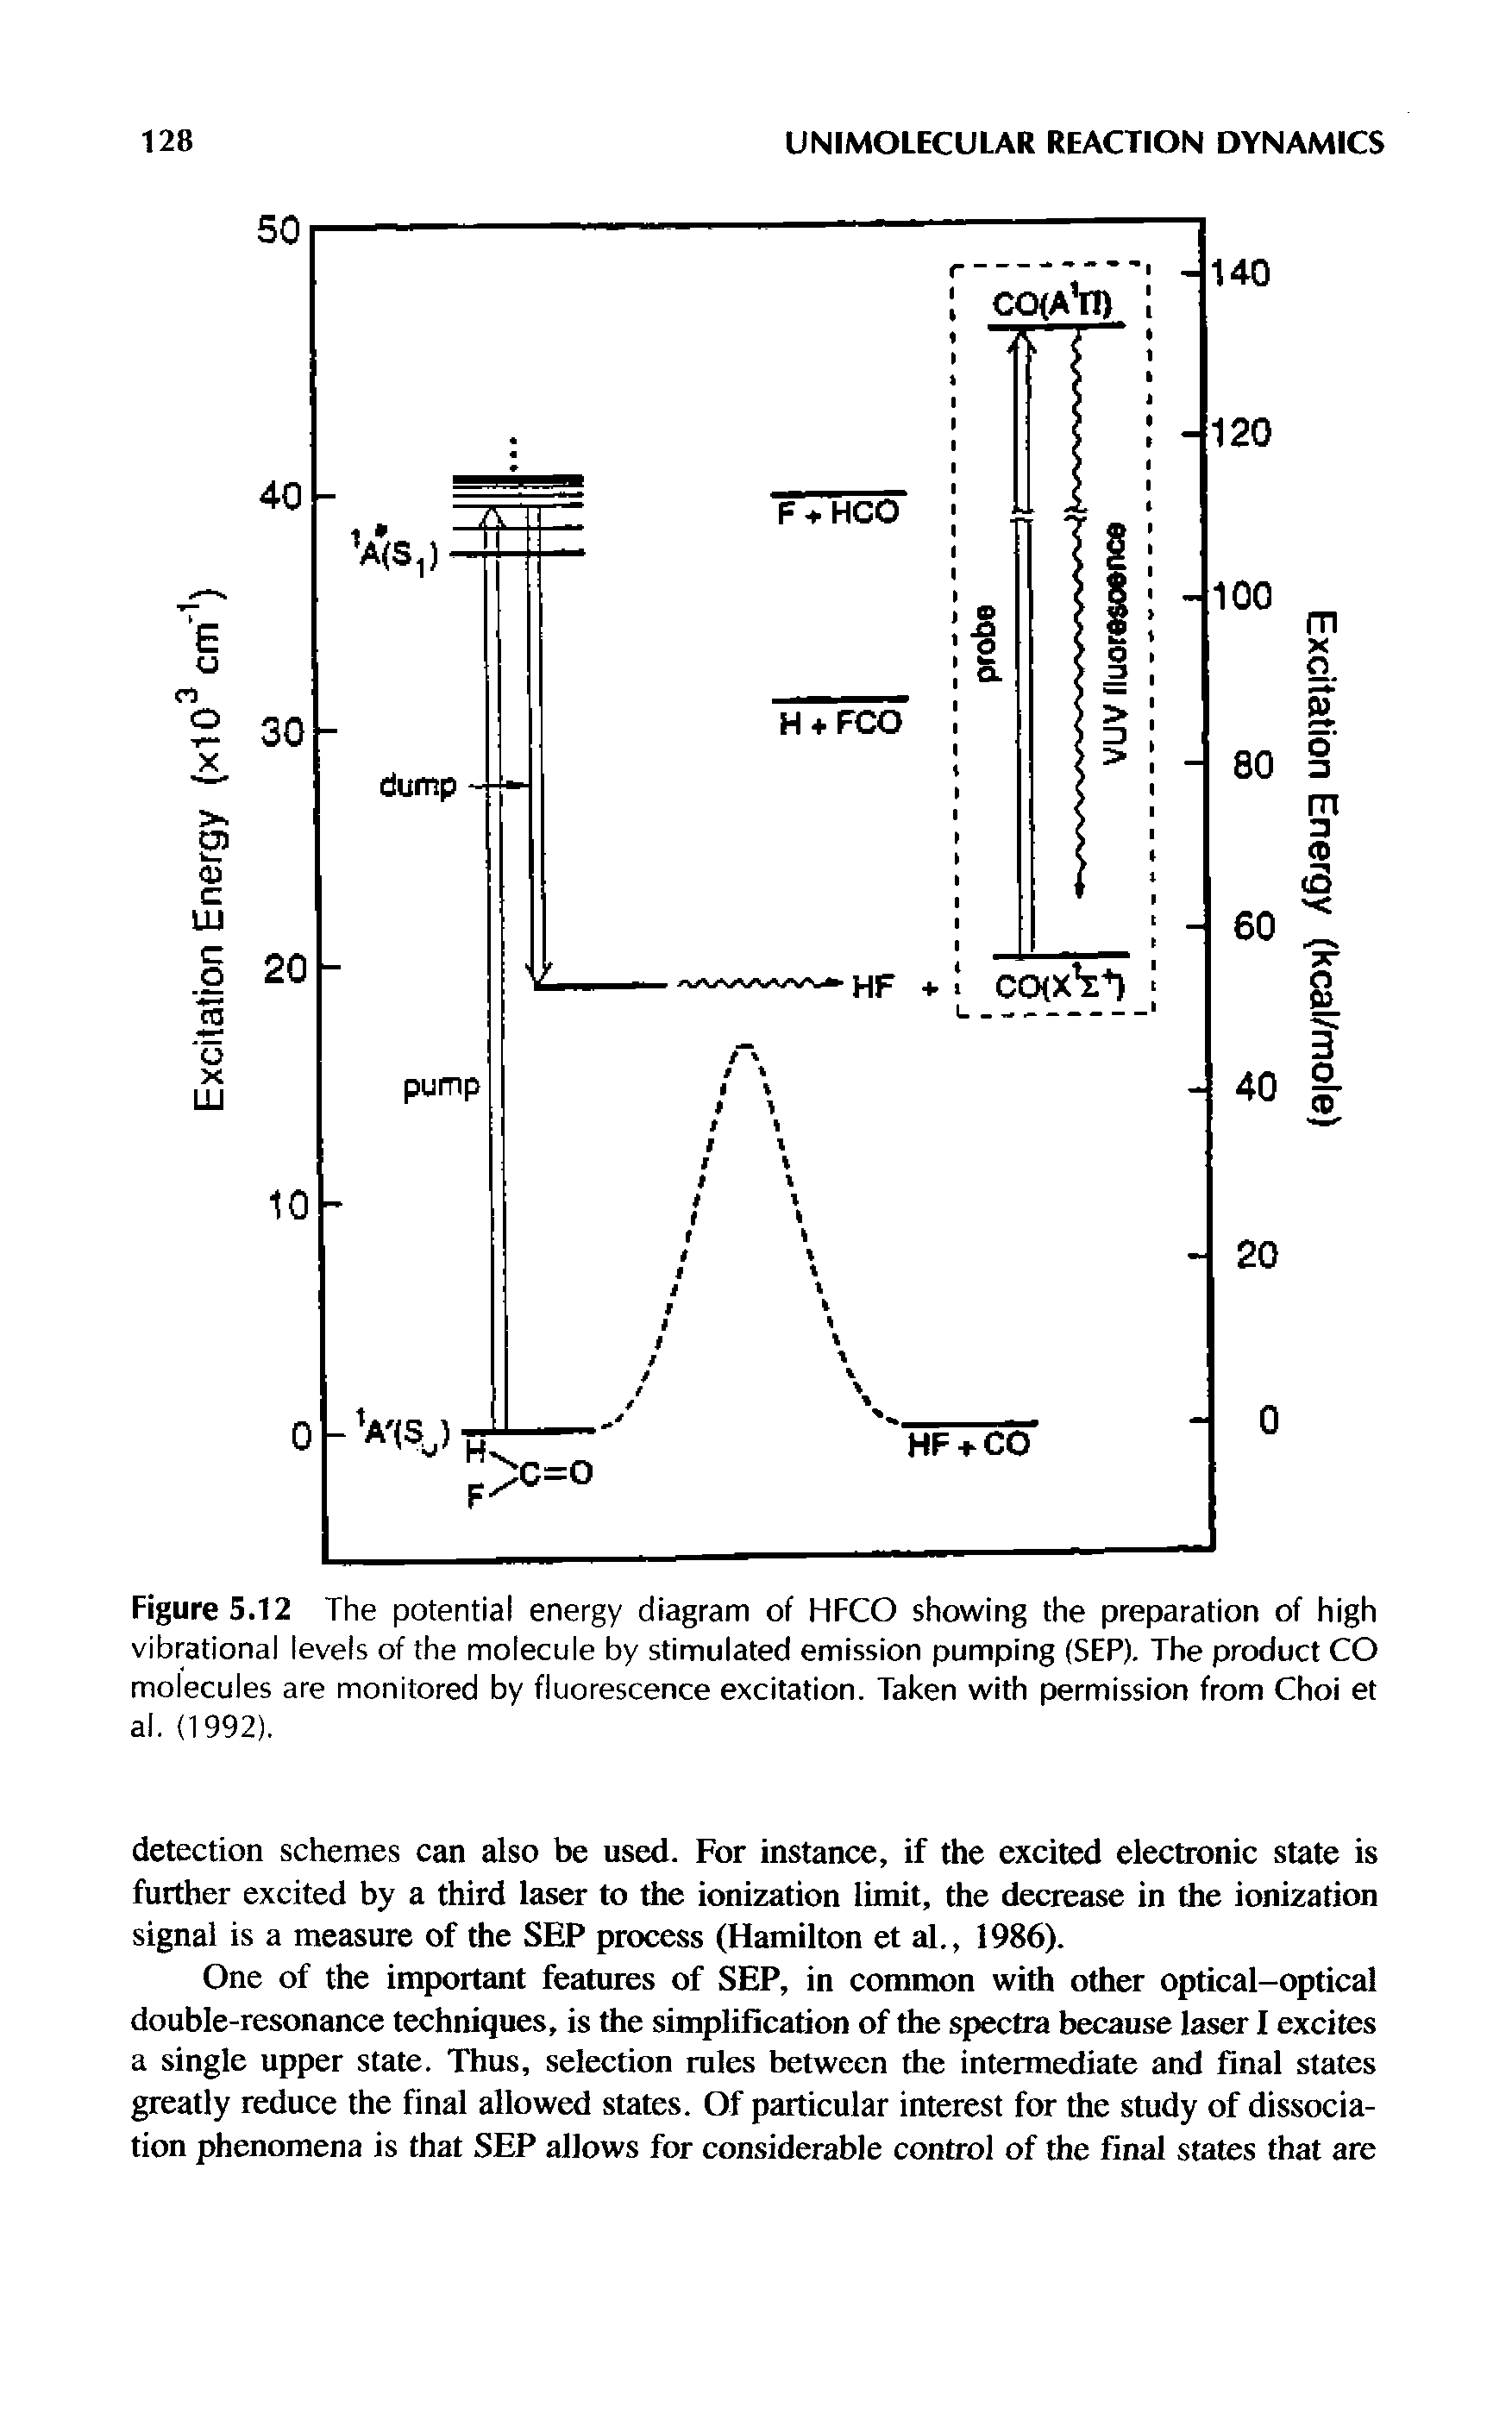 Figure 5.12 The potential energy diagram of HFCO showing the preparation of high vibrational levels of the molecule by stimulated emission pumping (SEP). The product CO molecules are monitored by fluorescence excitation. Taken with permission from Choi et...